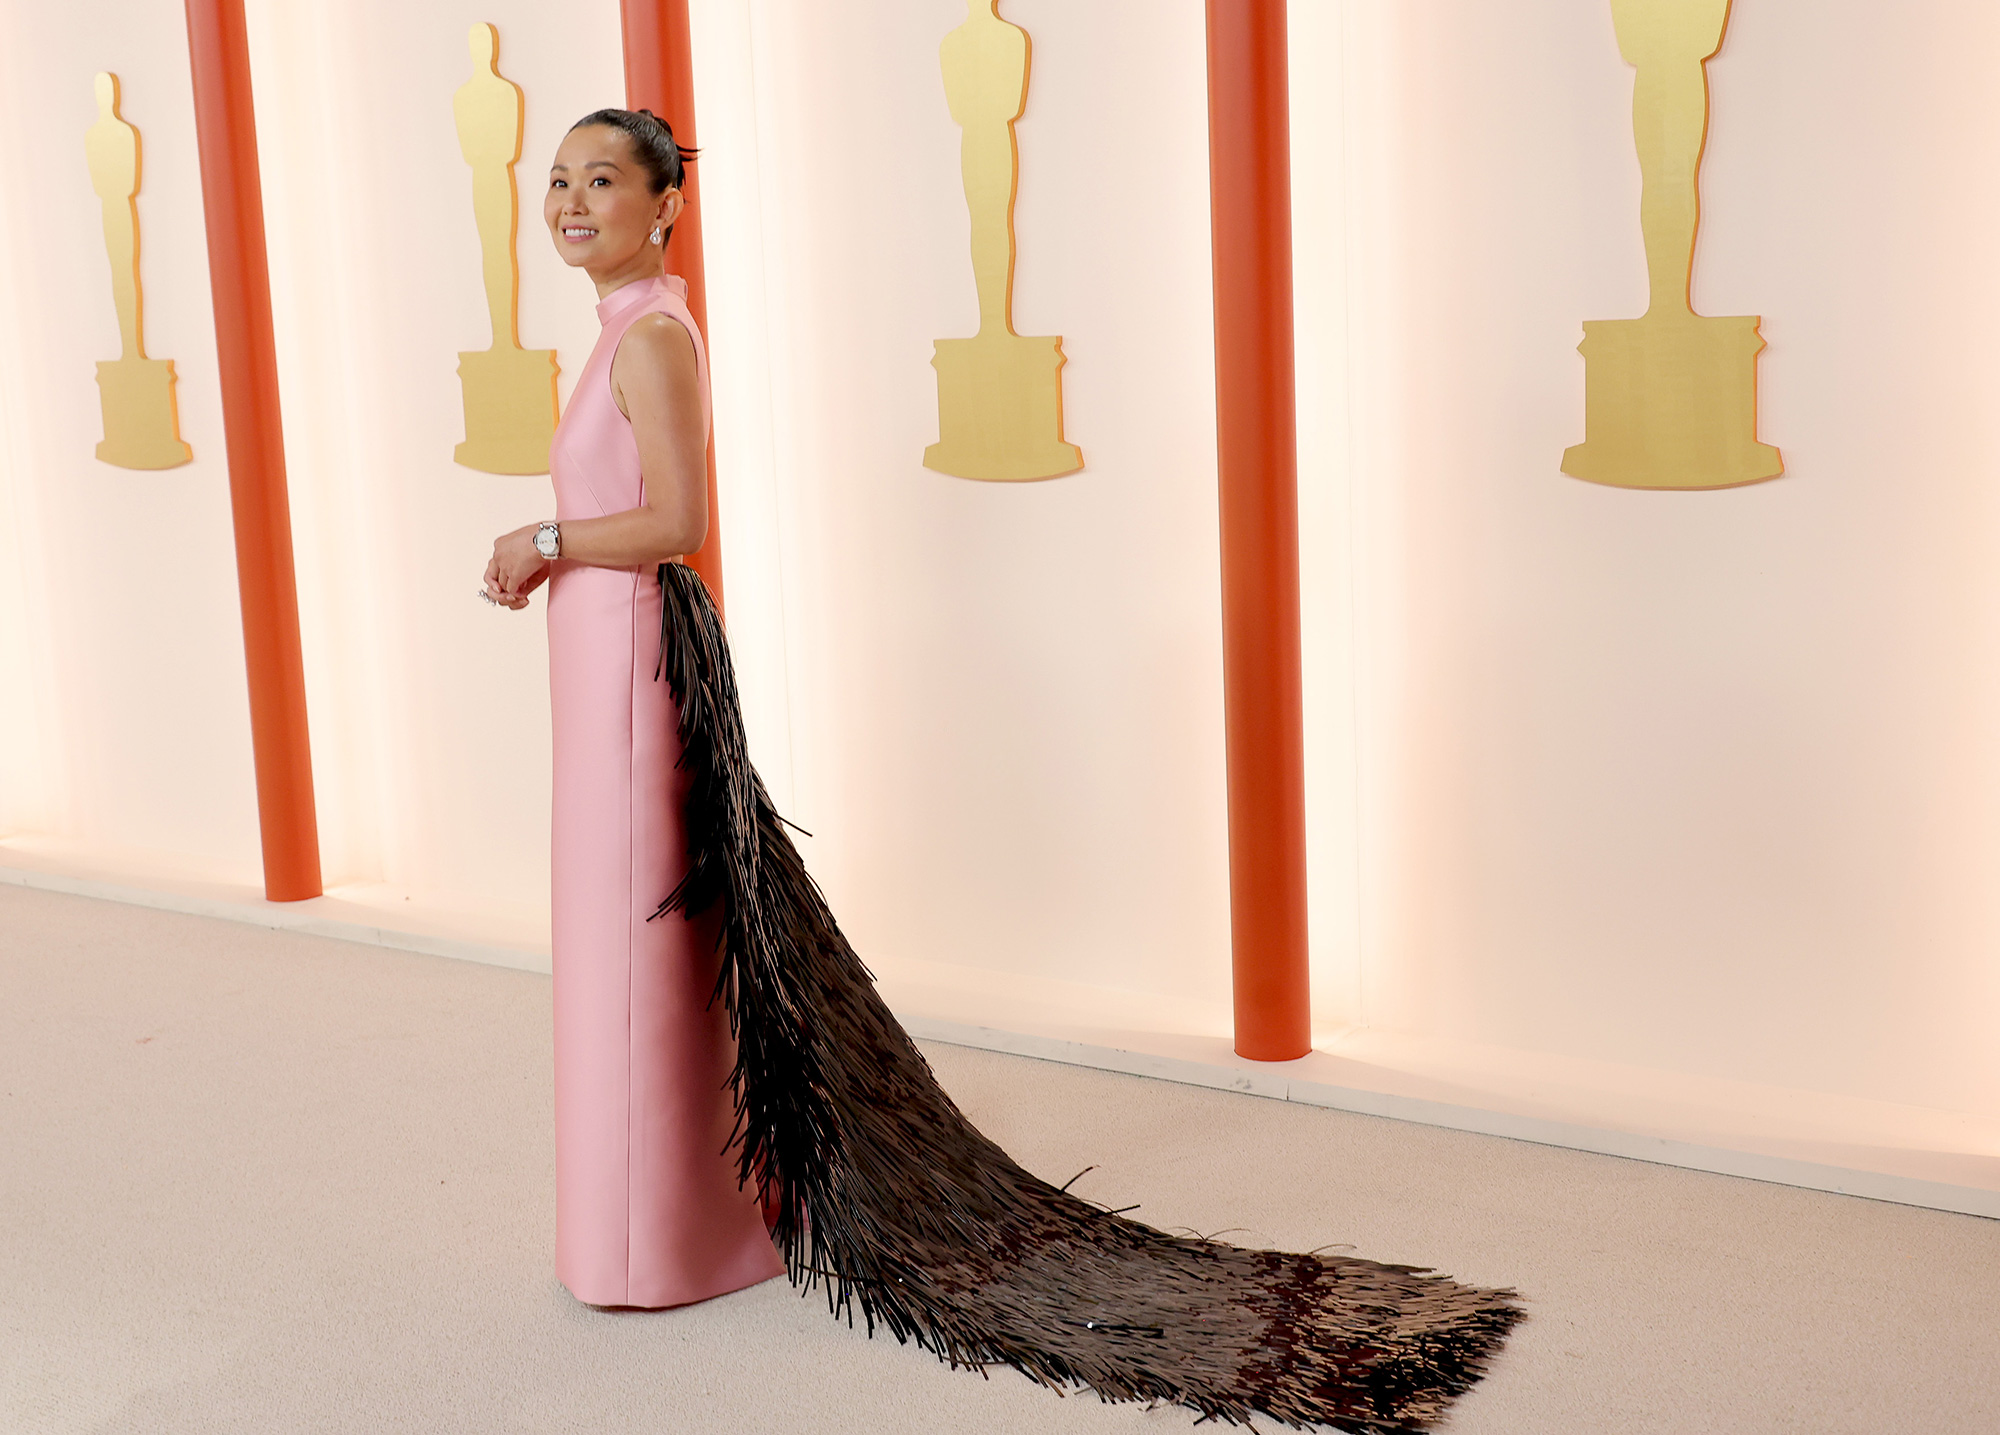 Red carpet fashion moments from the Oscars - CNN Style